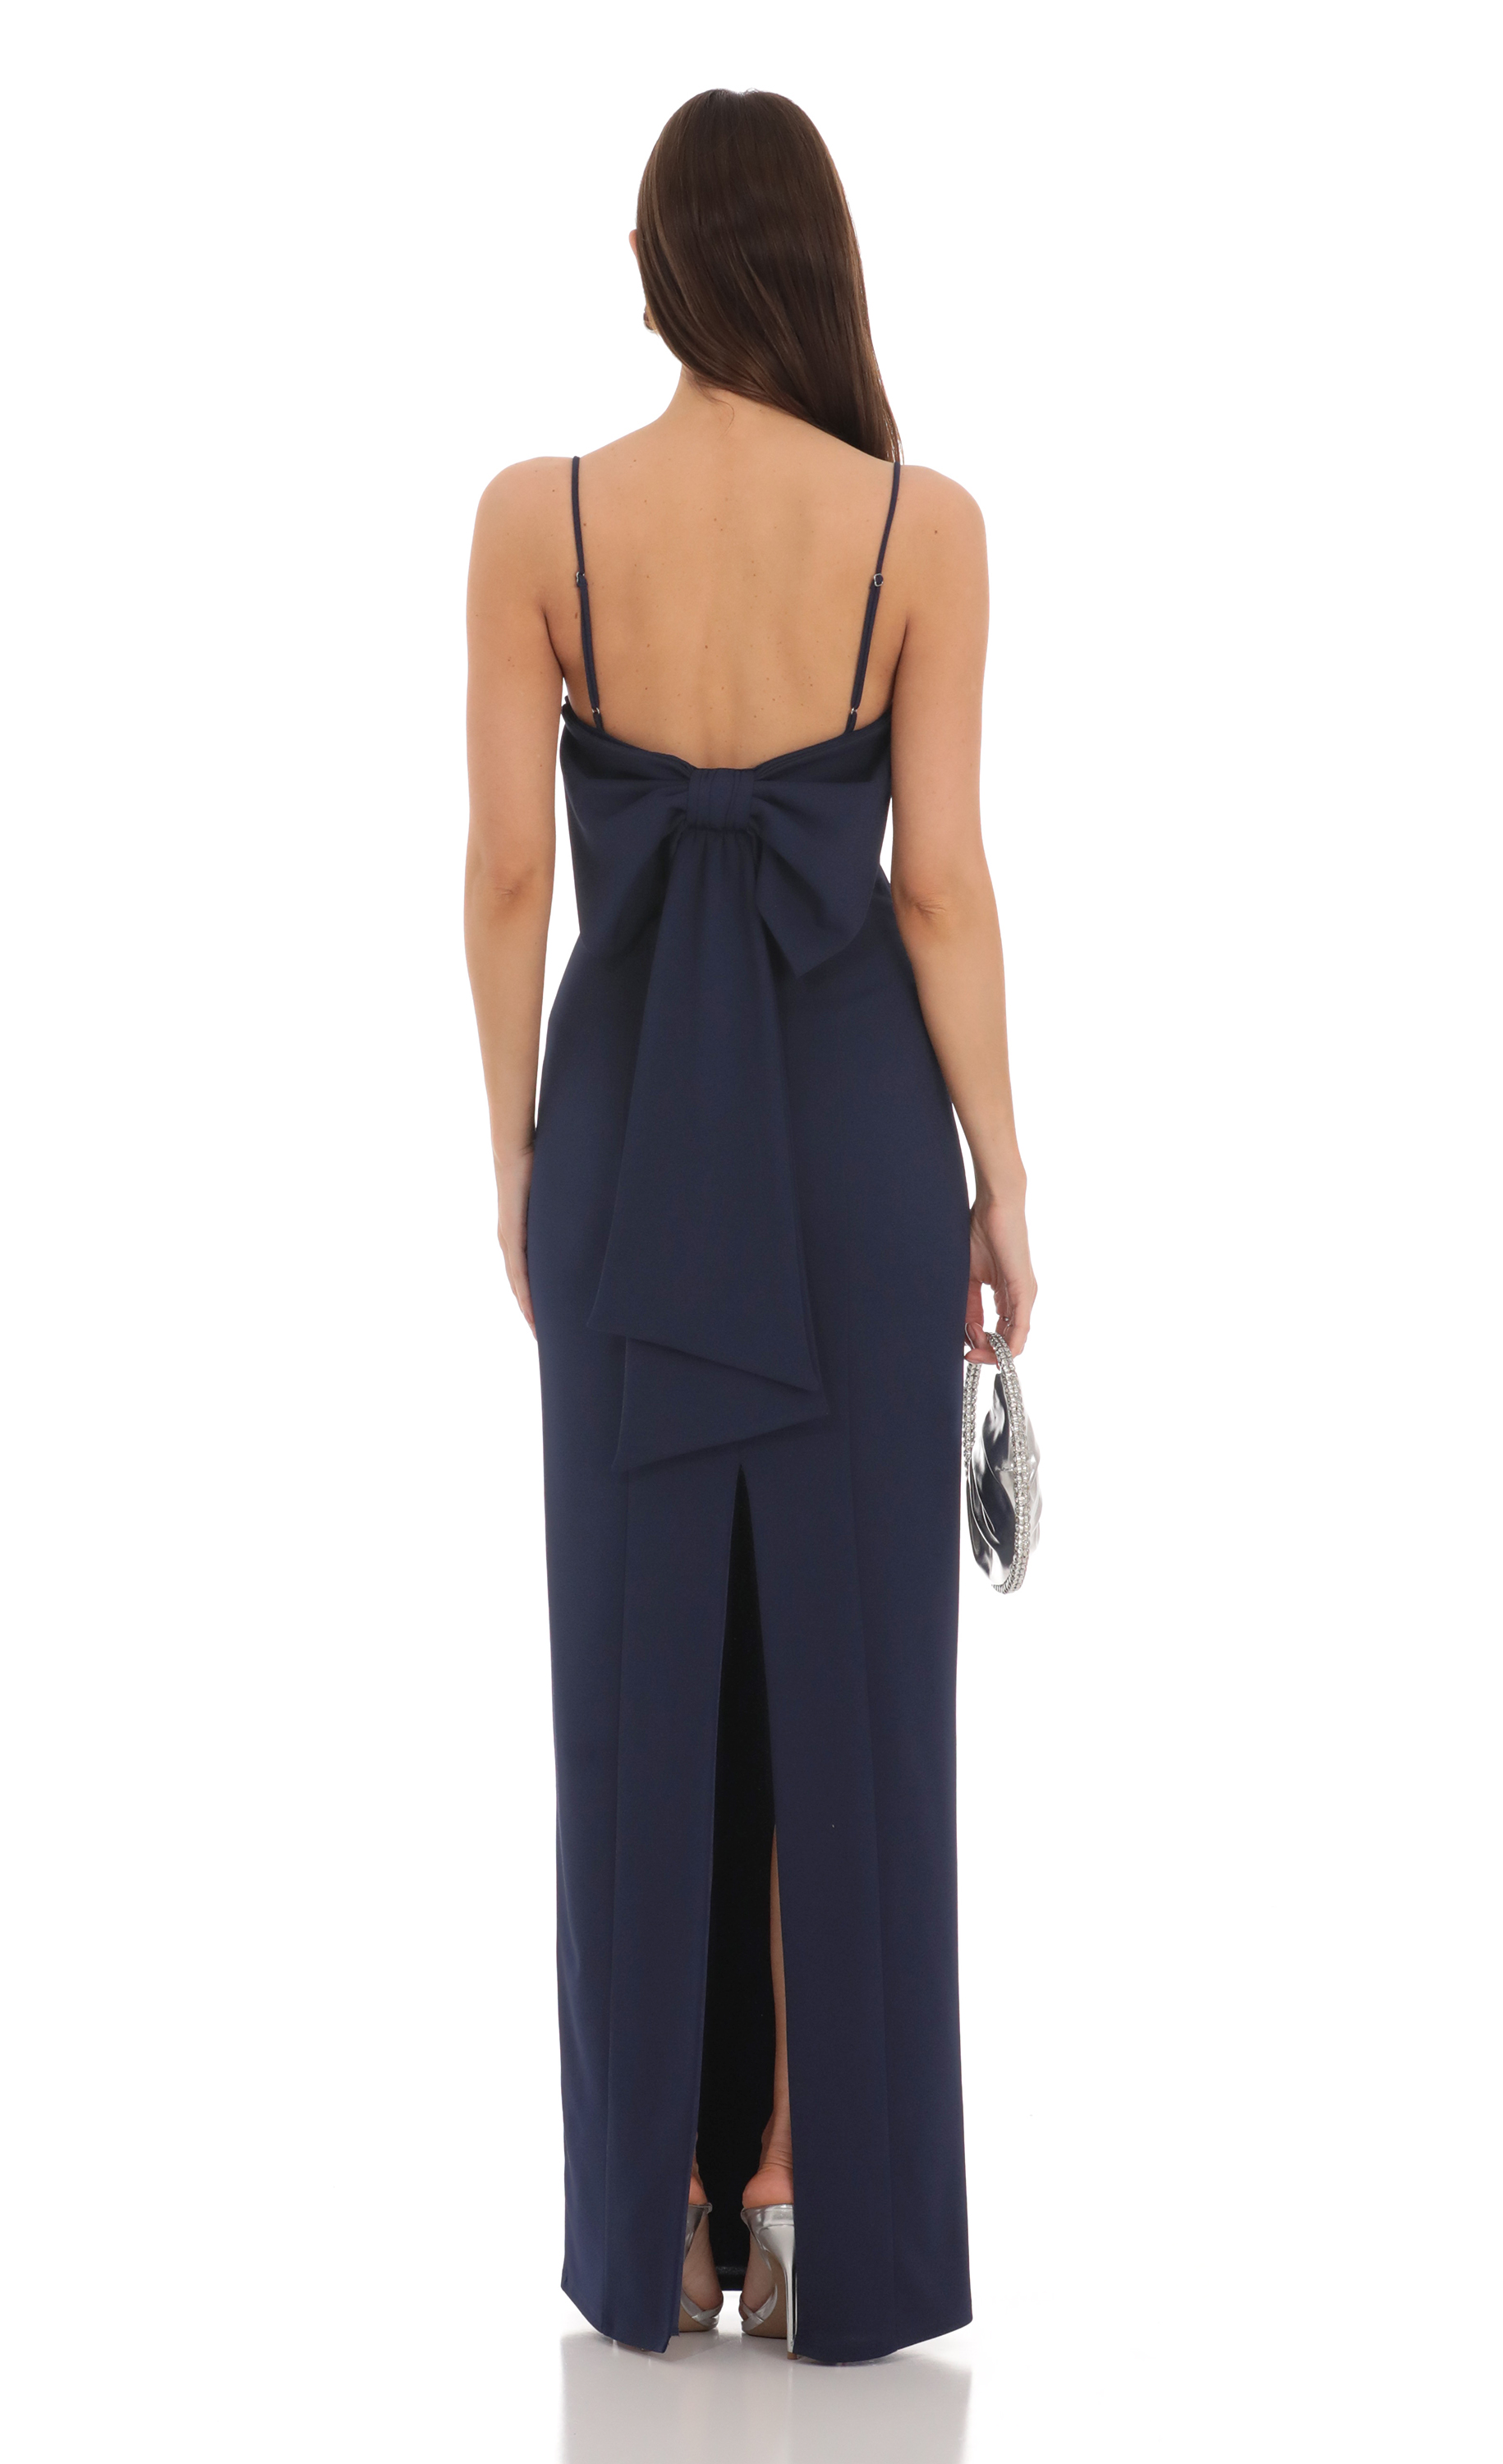 Thelia A-LIne Strapless Dress in Navy Blue